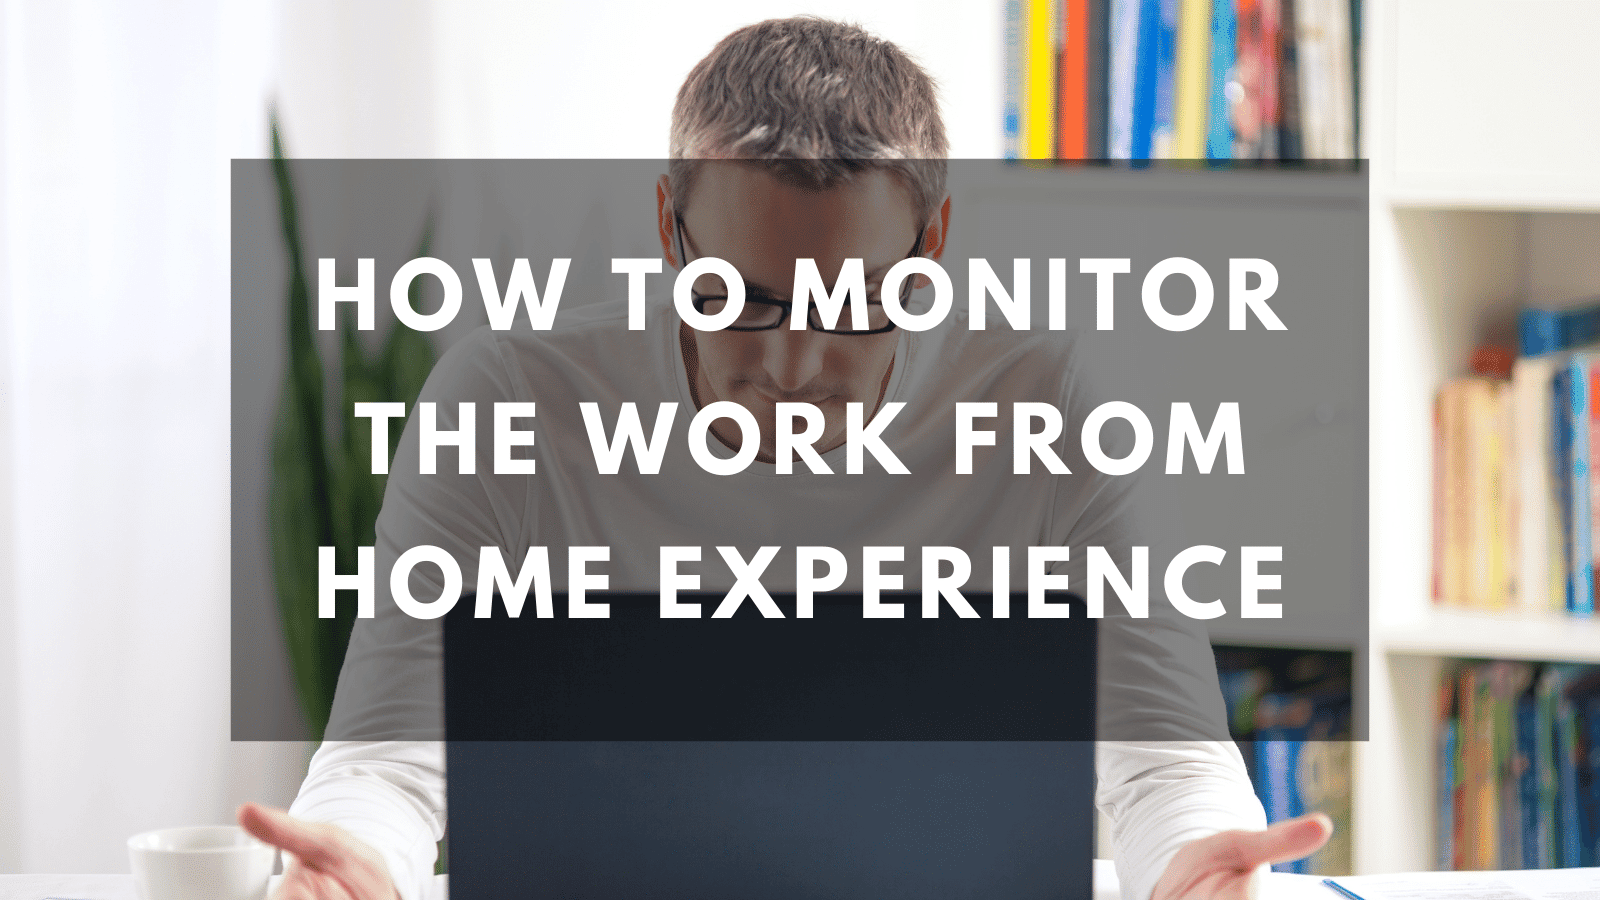 How to monitor the work from home experience